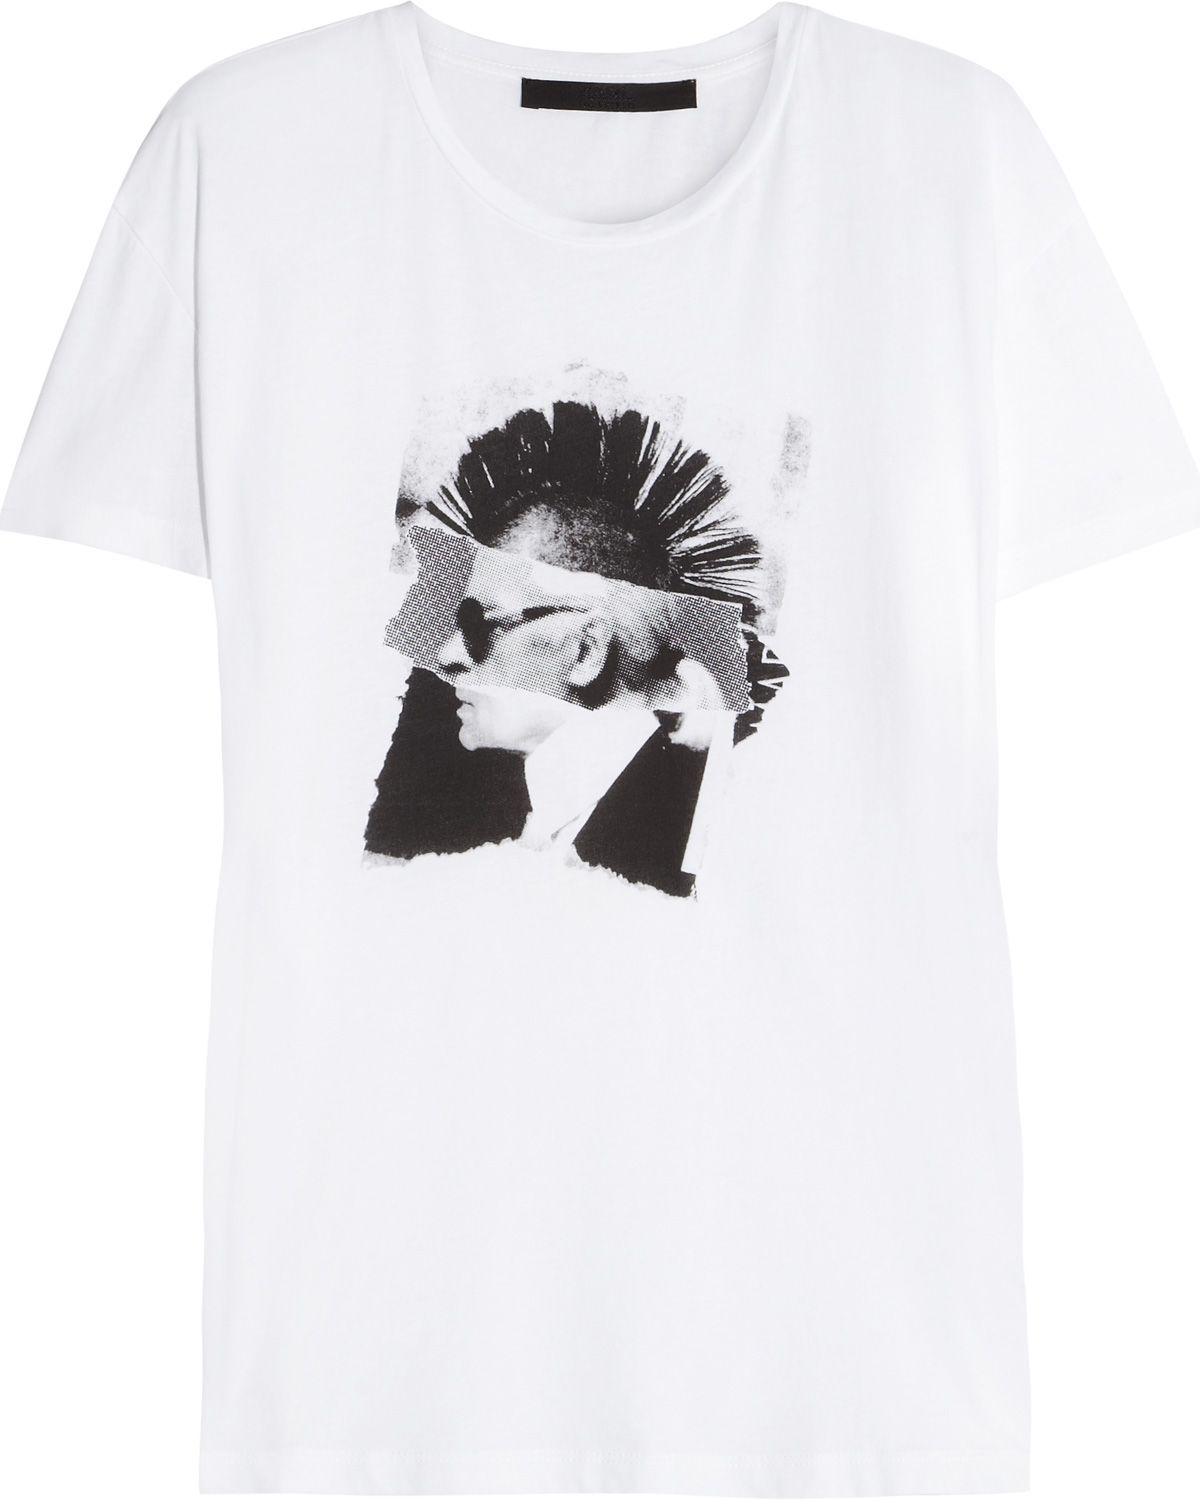 Karl Lagerfeld Goes PUNK For New Capsule Collection | Marie Claire UK